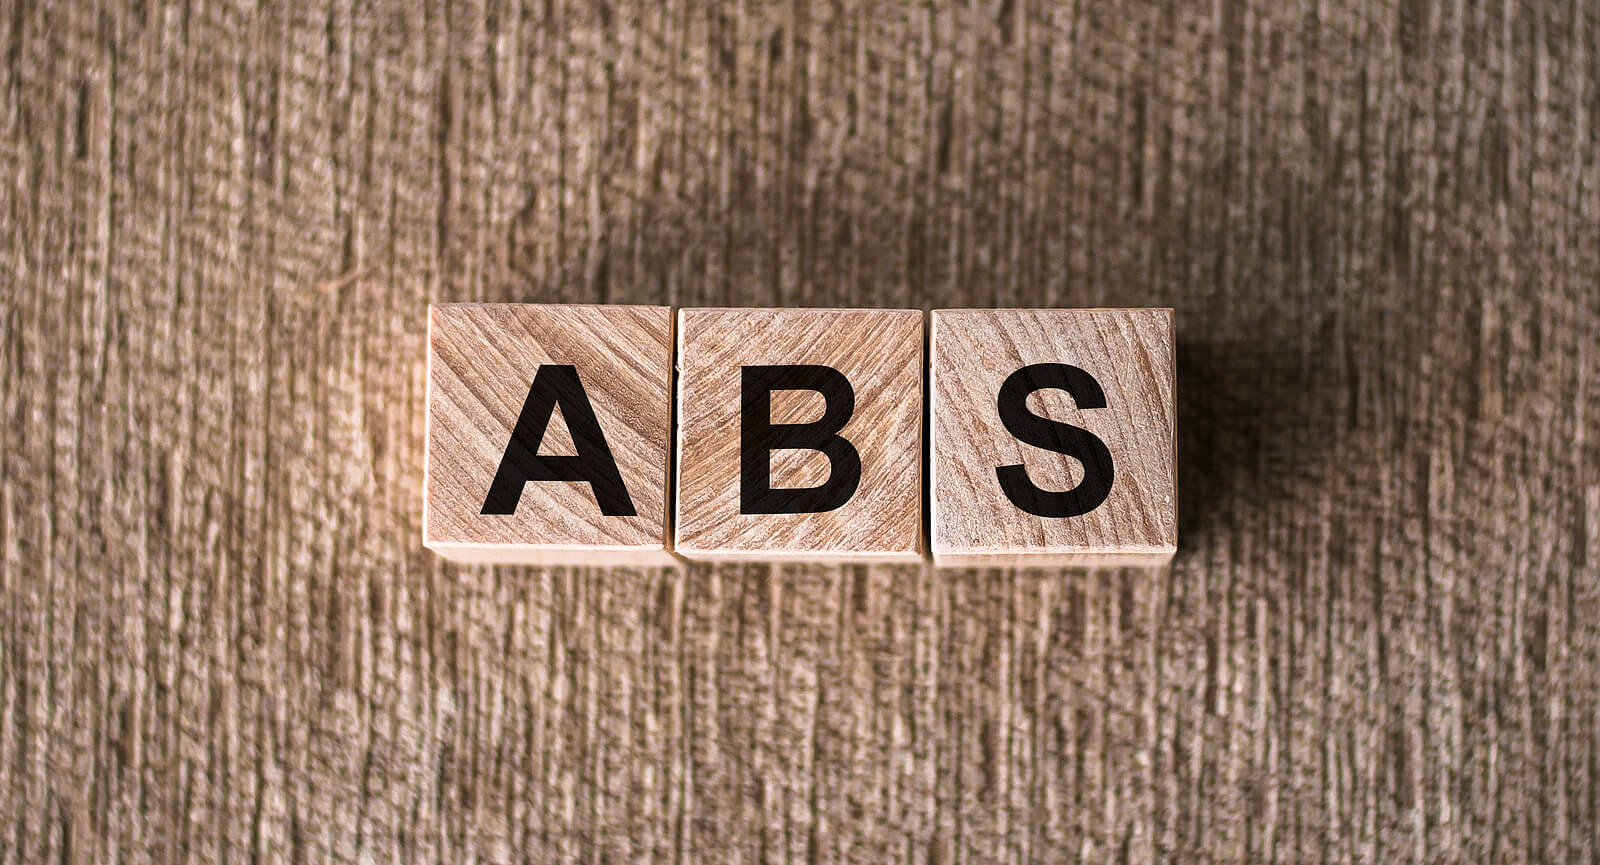 Abdominal Back Spine Or Abs Text On Wooden Cubes. Medical Concep